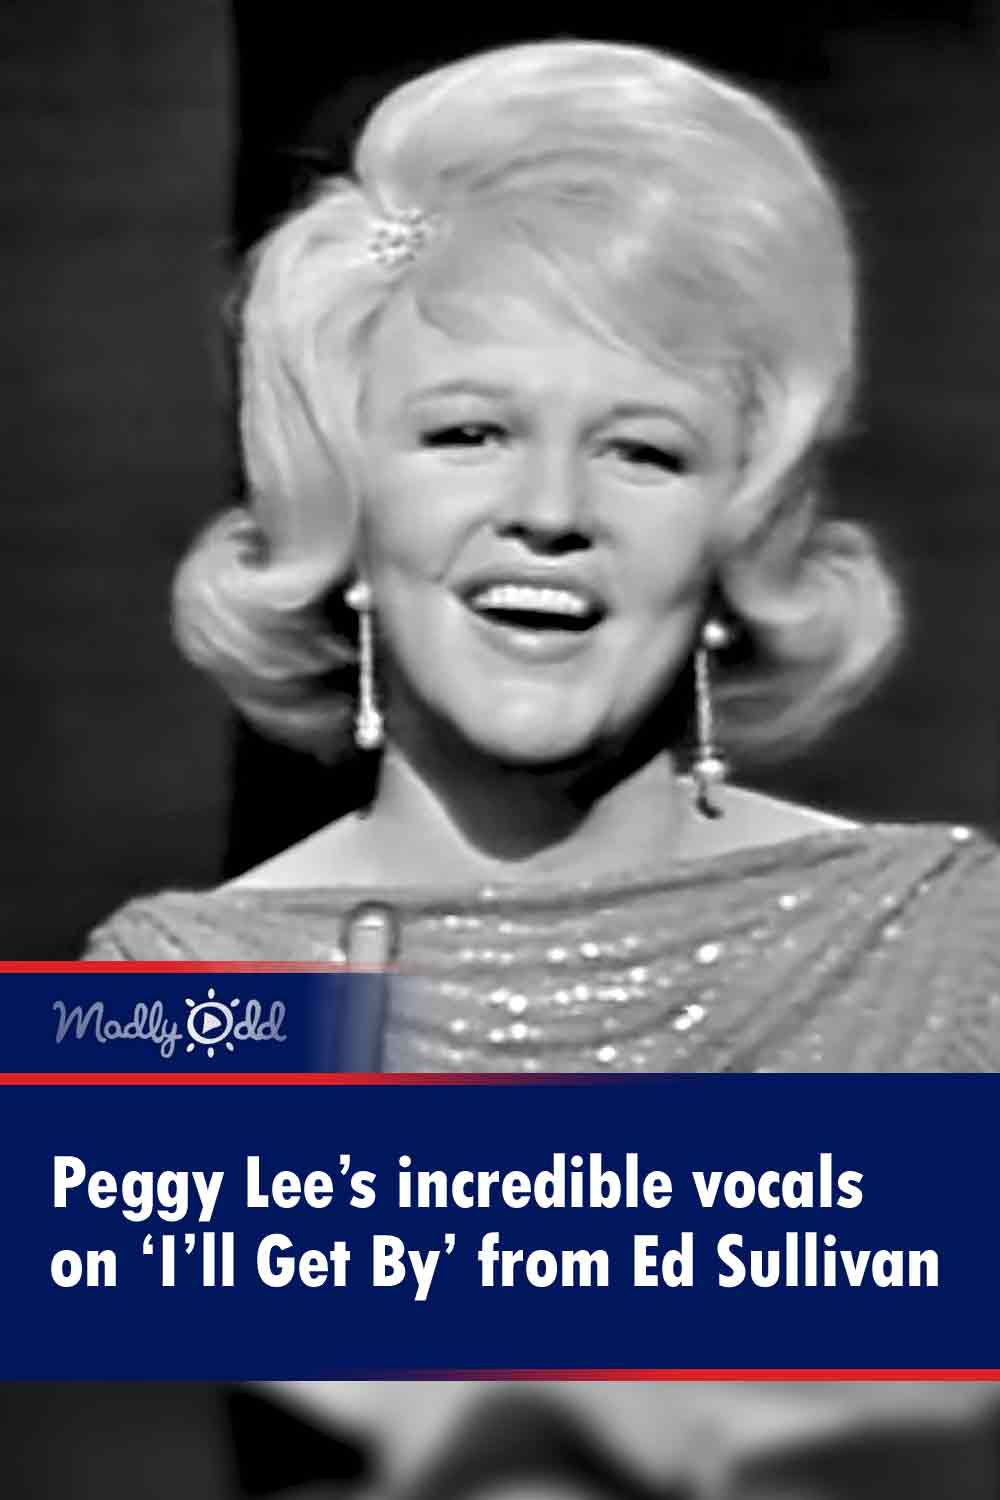 Peggy Lee’s incredible vocals on ‘I’ll Get By’ from Ed Sullivan